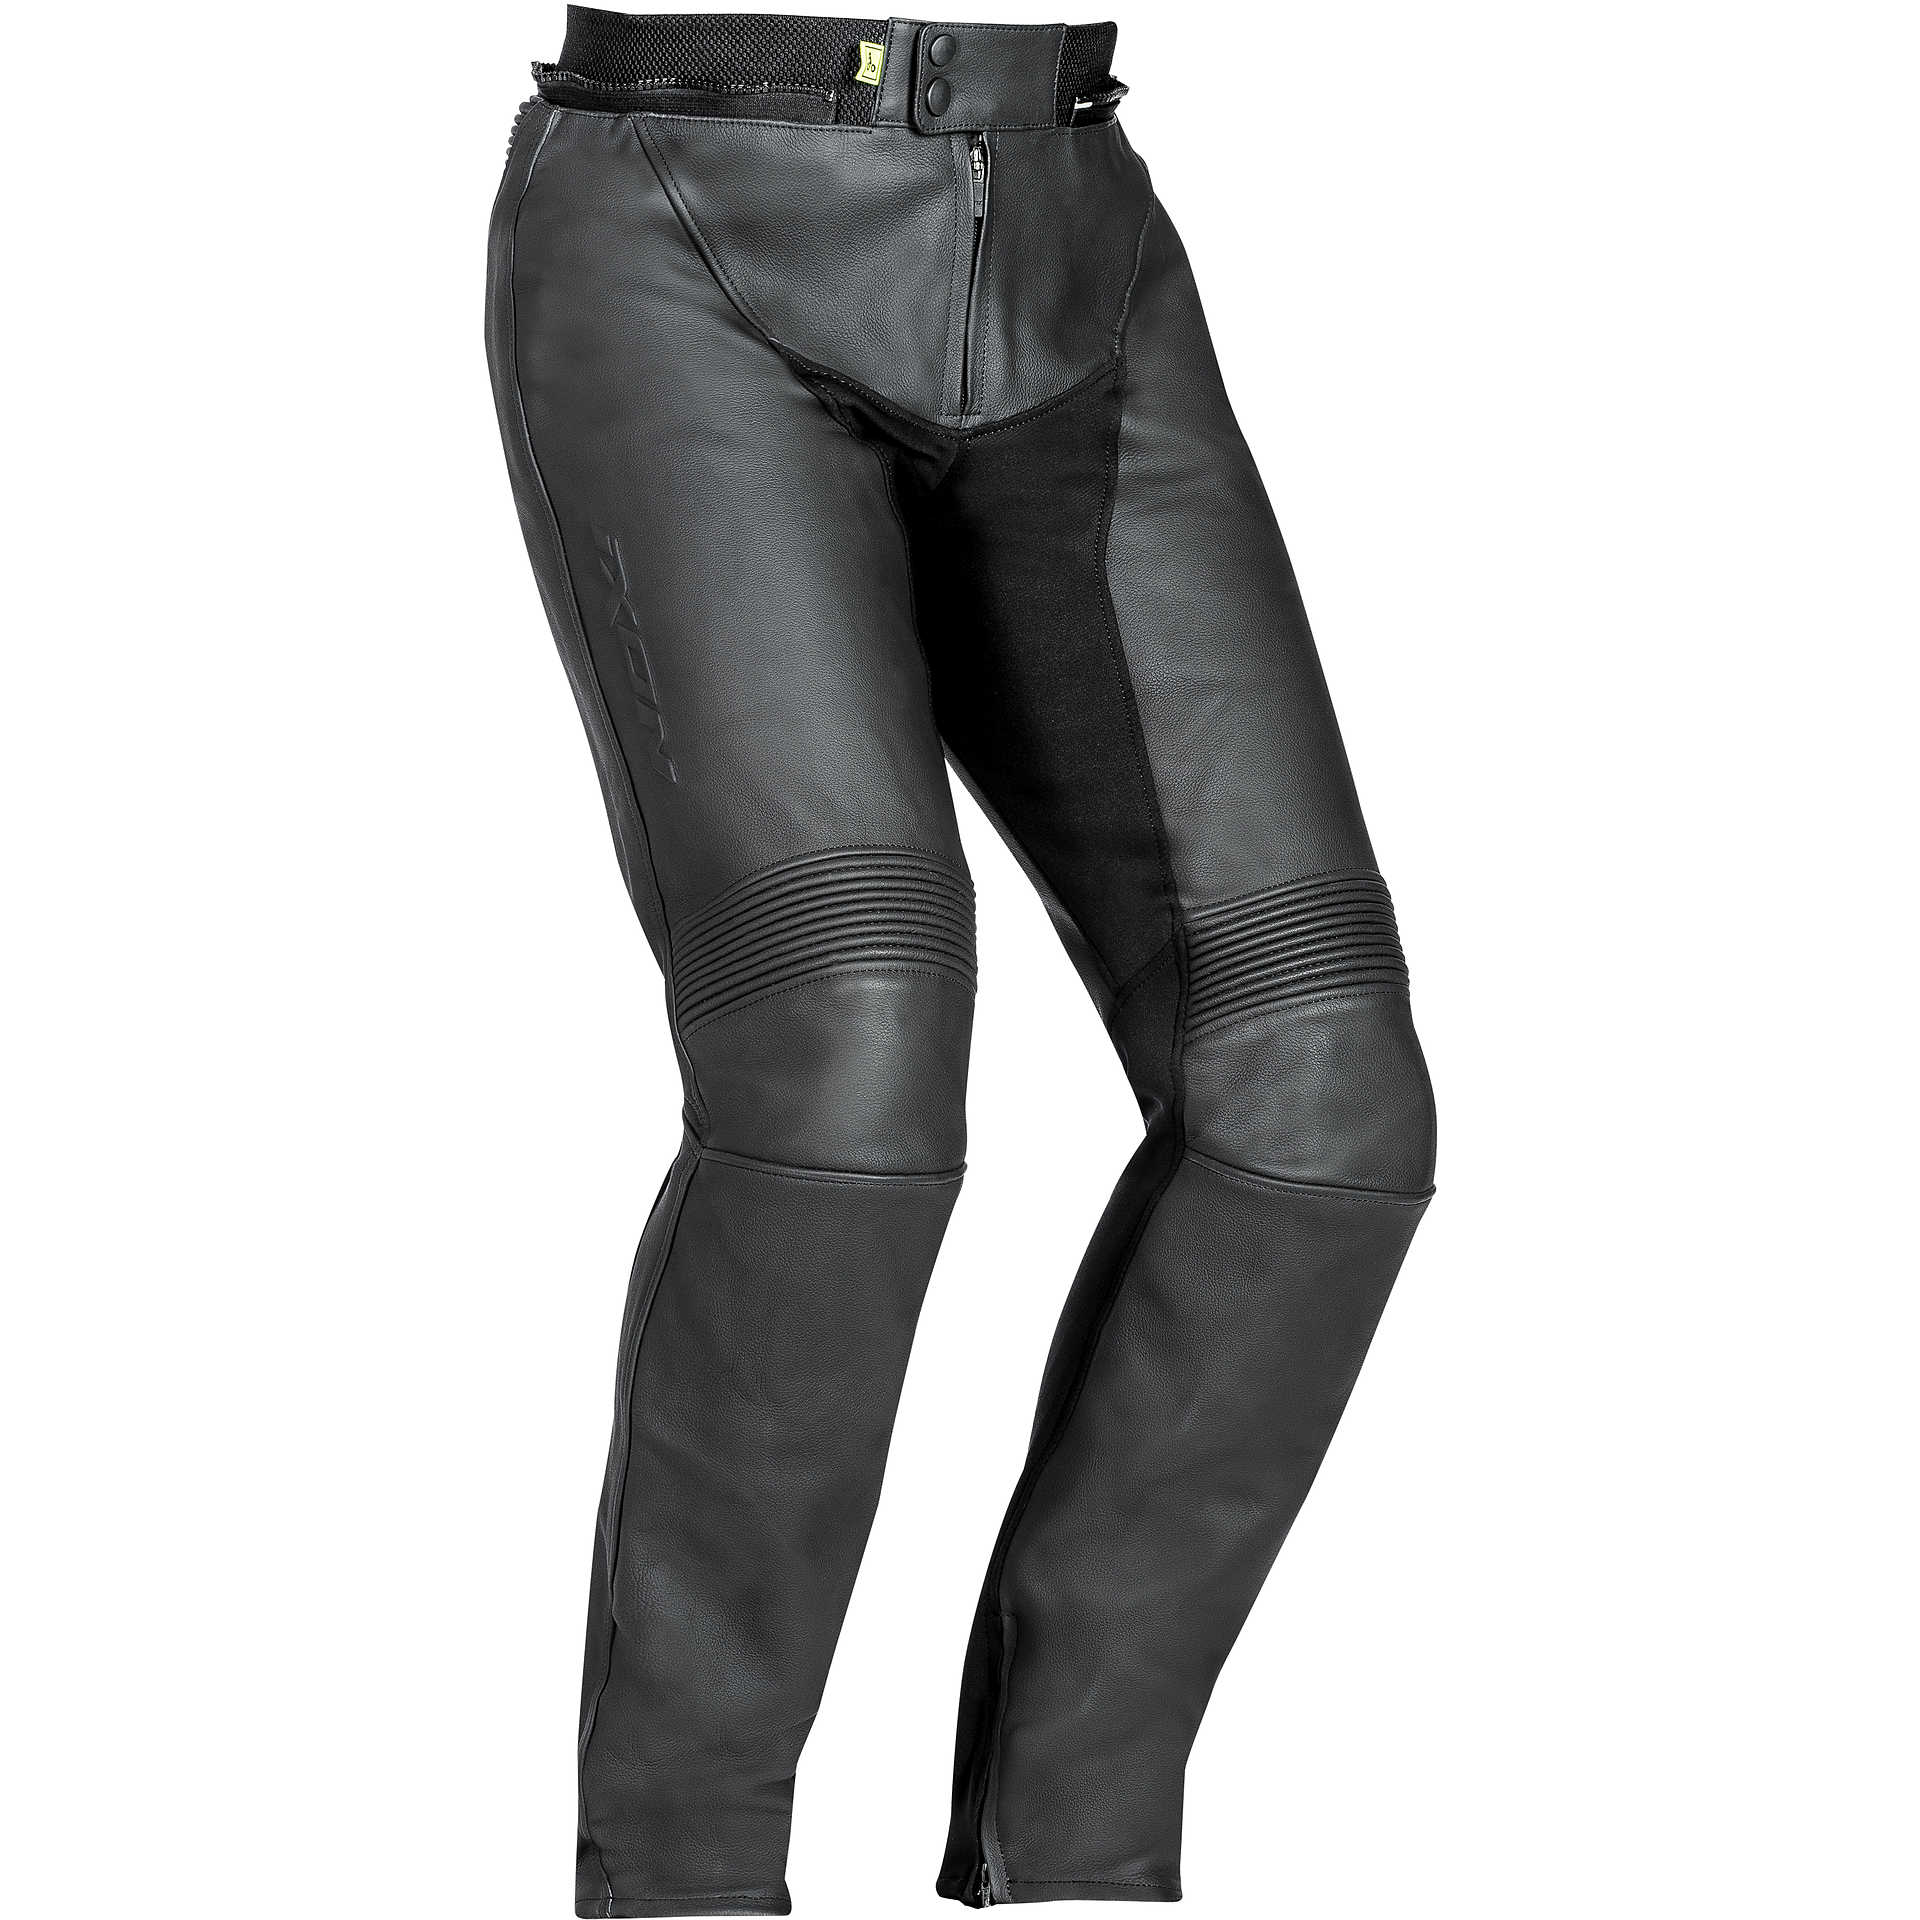 BUY NERVE Ladies Motorcycle Jeans | Moto Jeans Womens ON SALE NOW! - Rugged Motorbike  Jeans